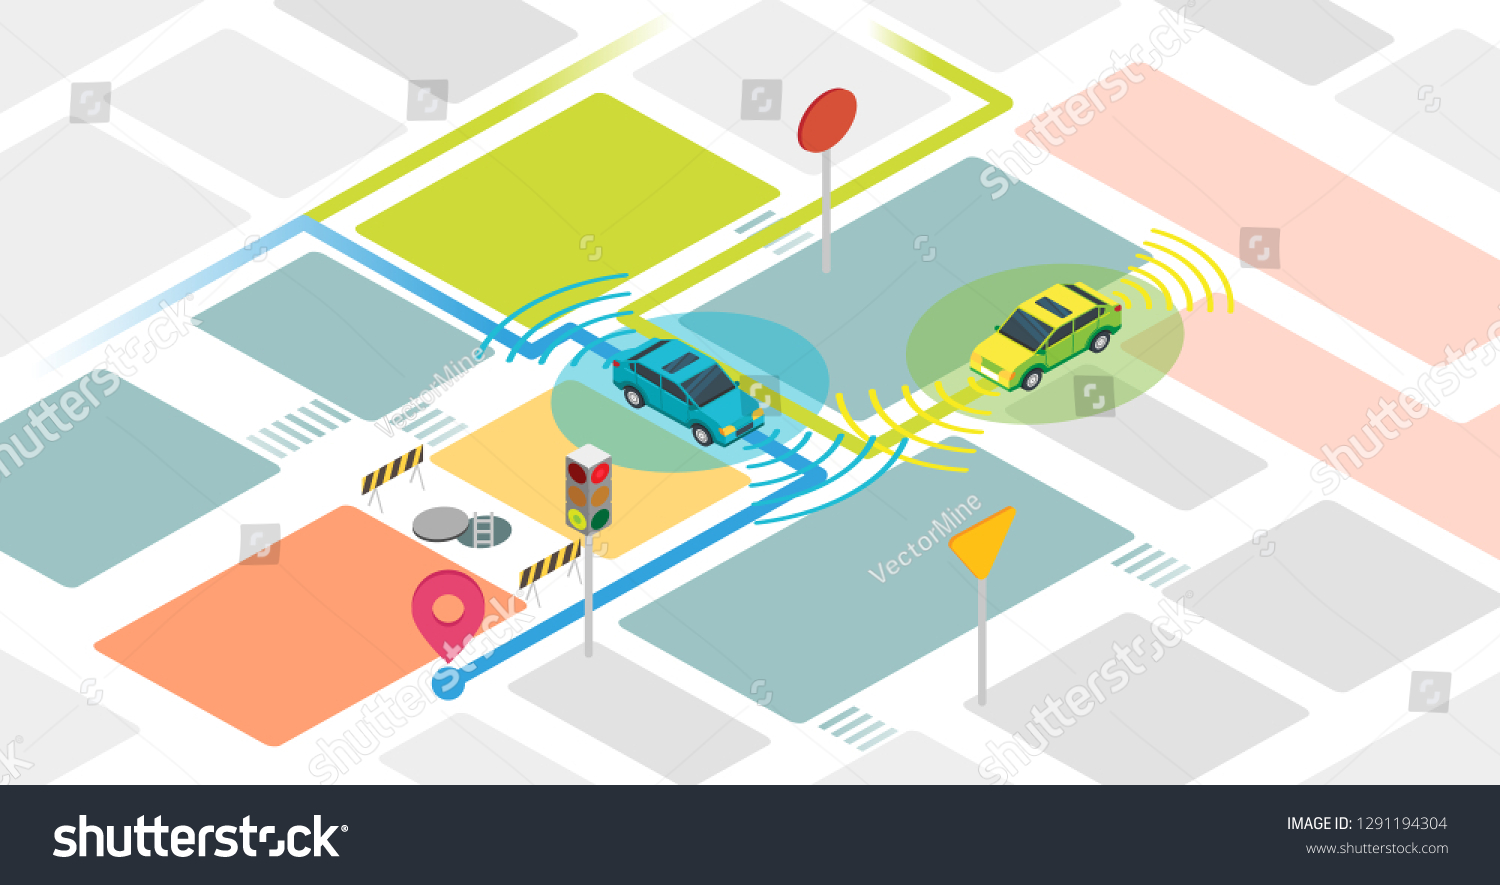 Self driving cars vector illustration. Example with self driving vehicles. Smart and intelligent autonomous transport to reach destination safe without driver and control. GPS auto navigation system.